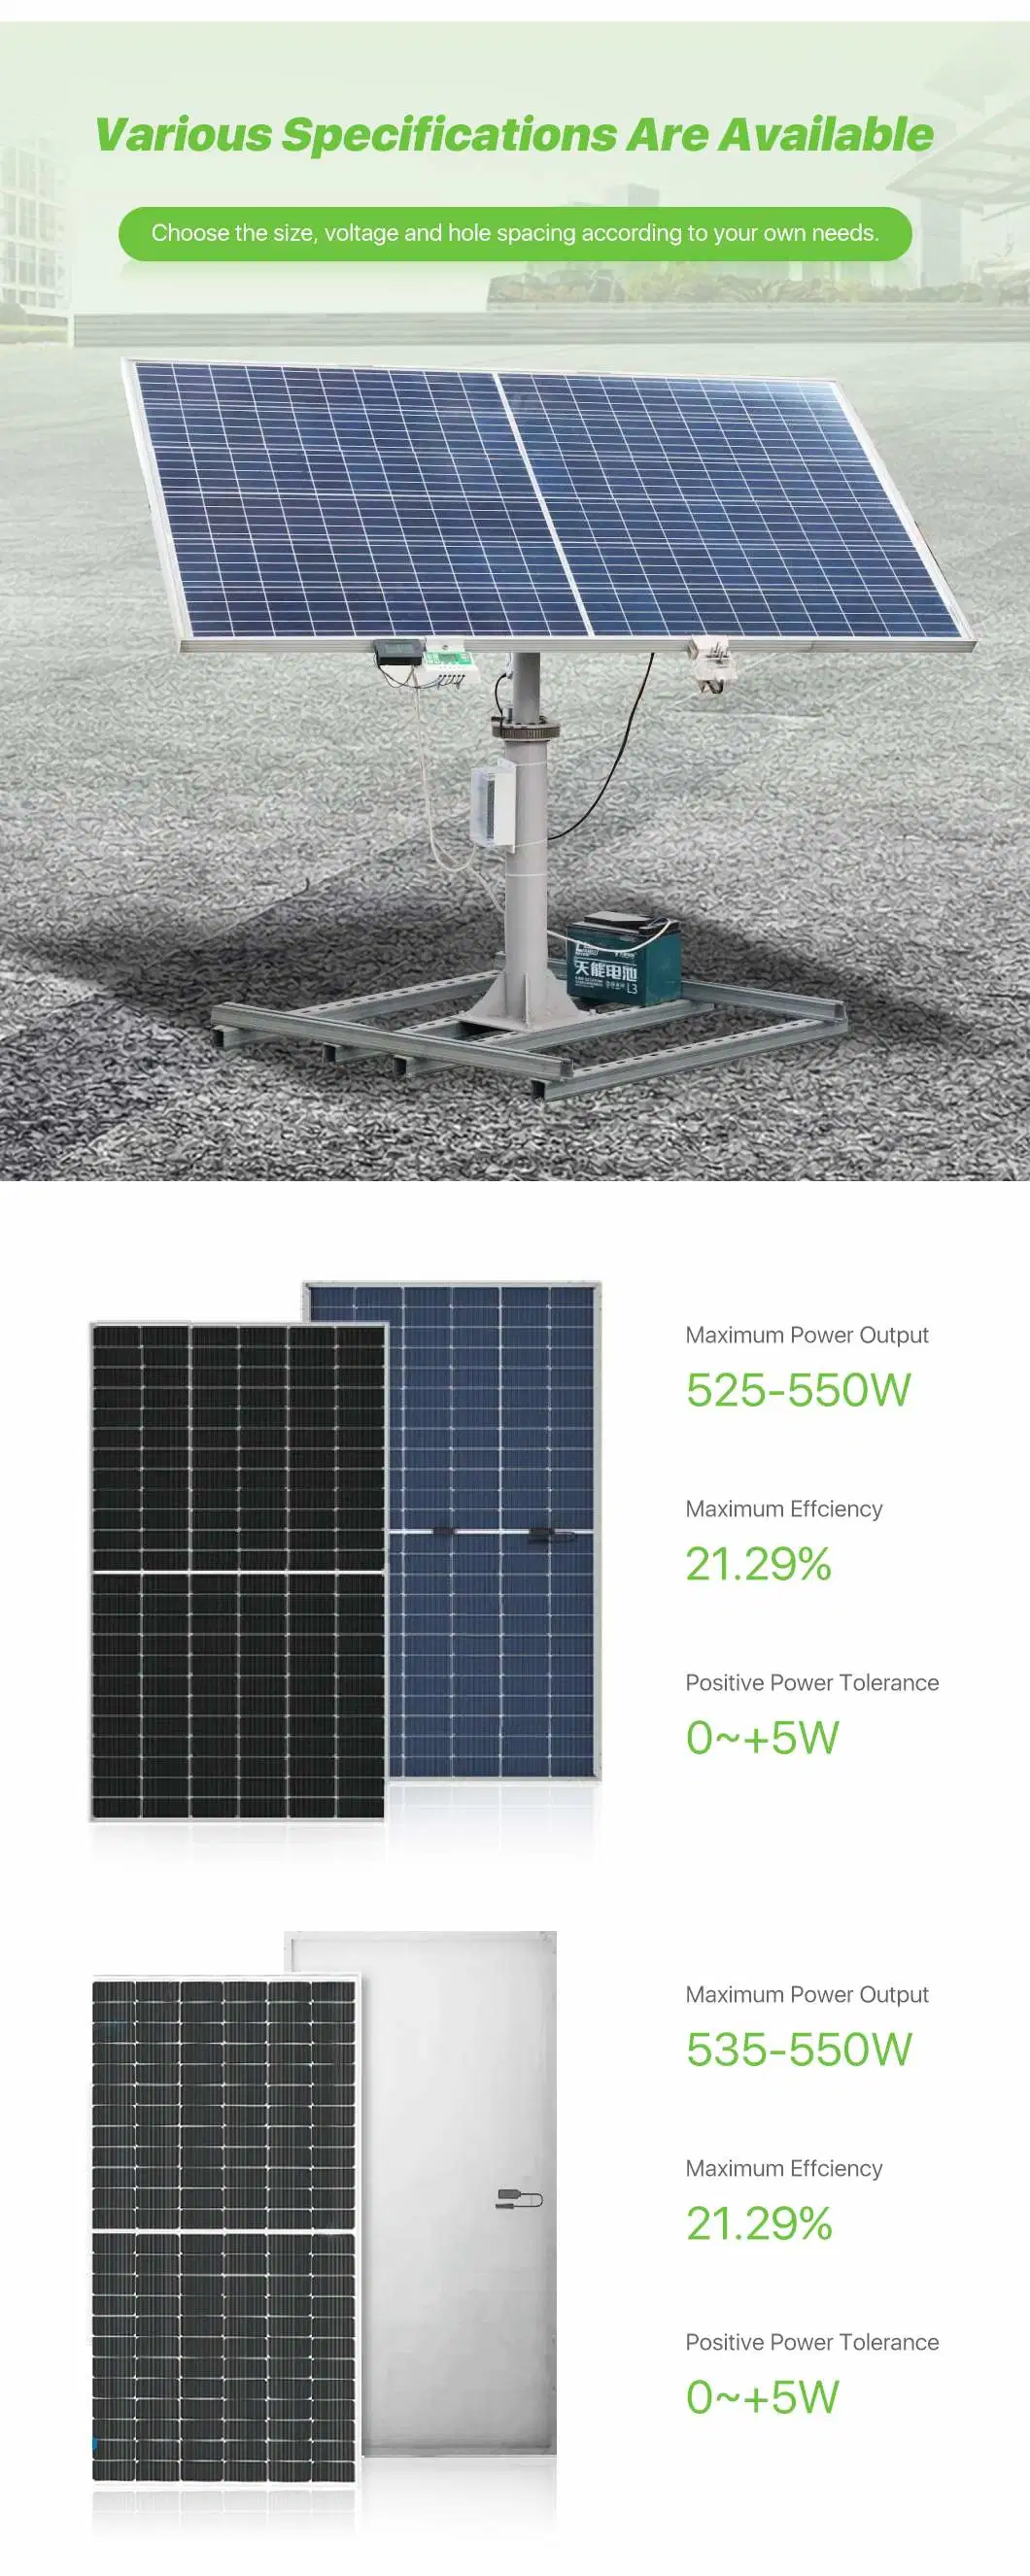 Maxbo 20kw 20 Kw Hybrid Complete Solar Energy Power System Kit with Solar Panels for Home Ground Mounting Solar Panel Price